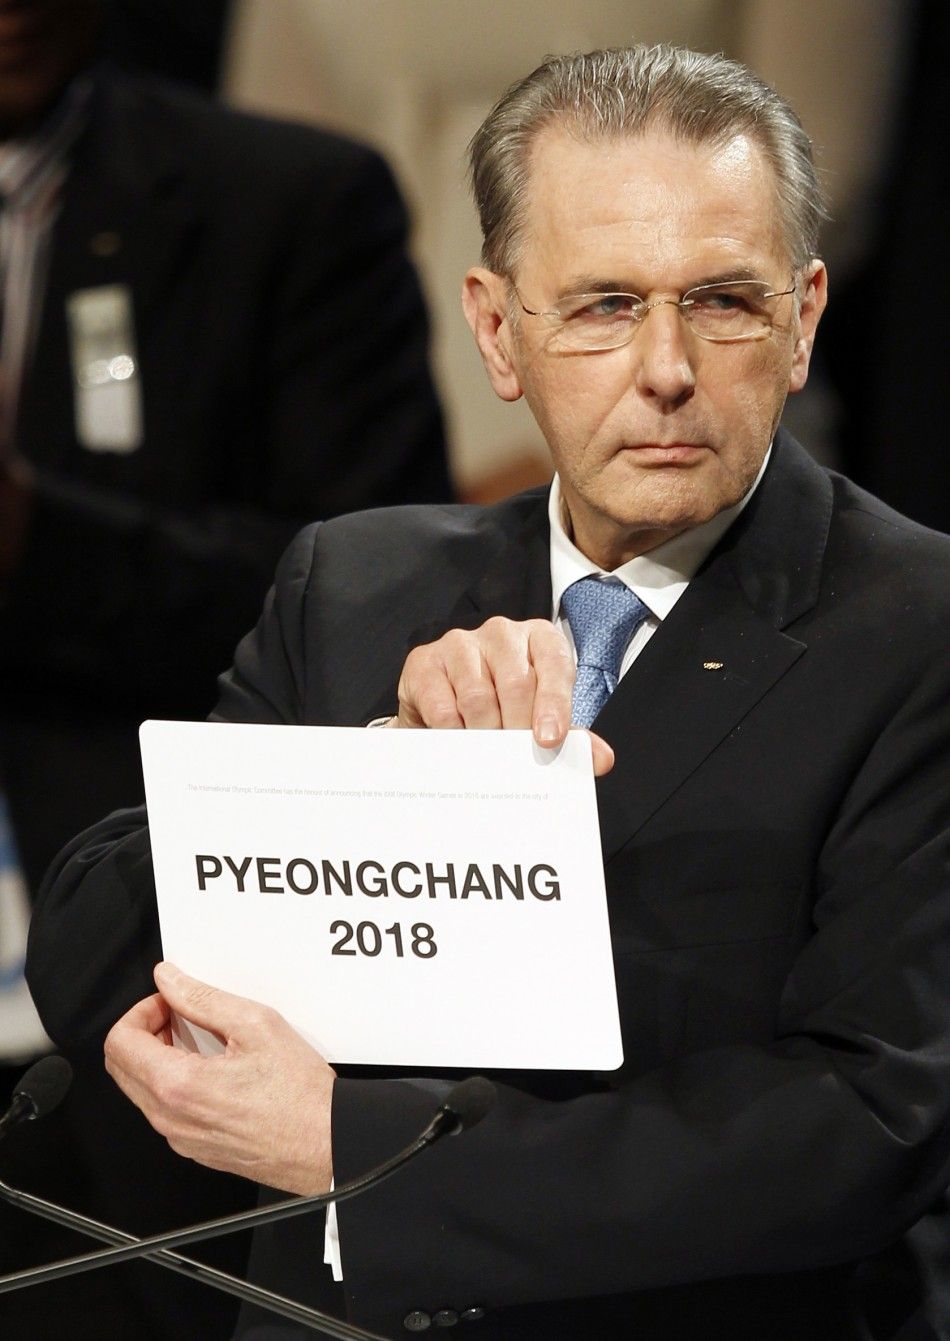 International Olympic Committee IOC President Jacques Rogge announces Pyeongchang as the winning city bid for the 2018 Winter Olympic Games